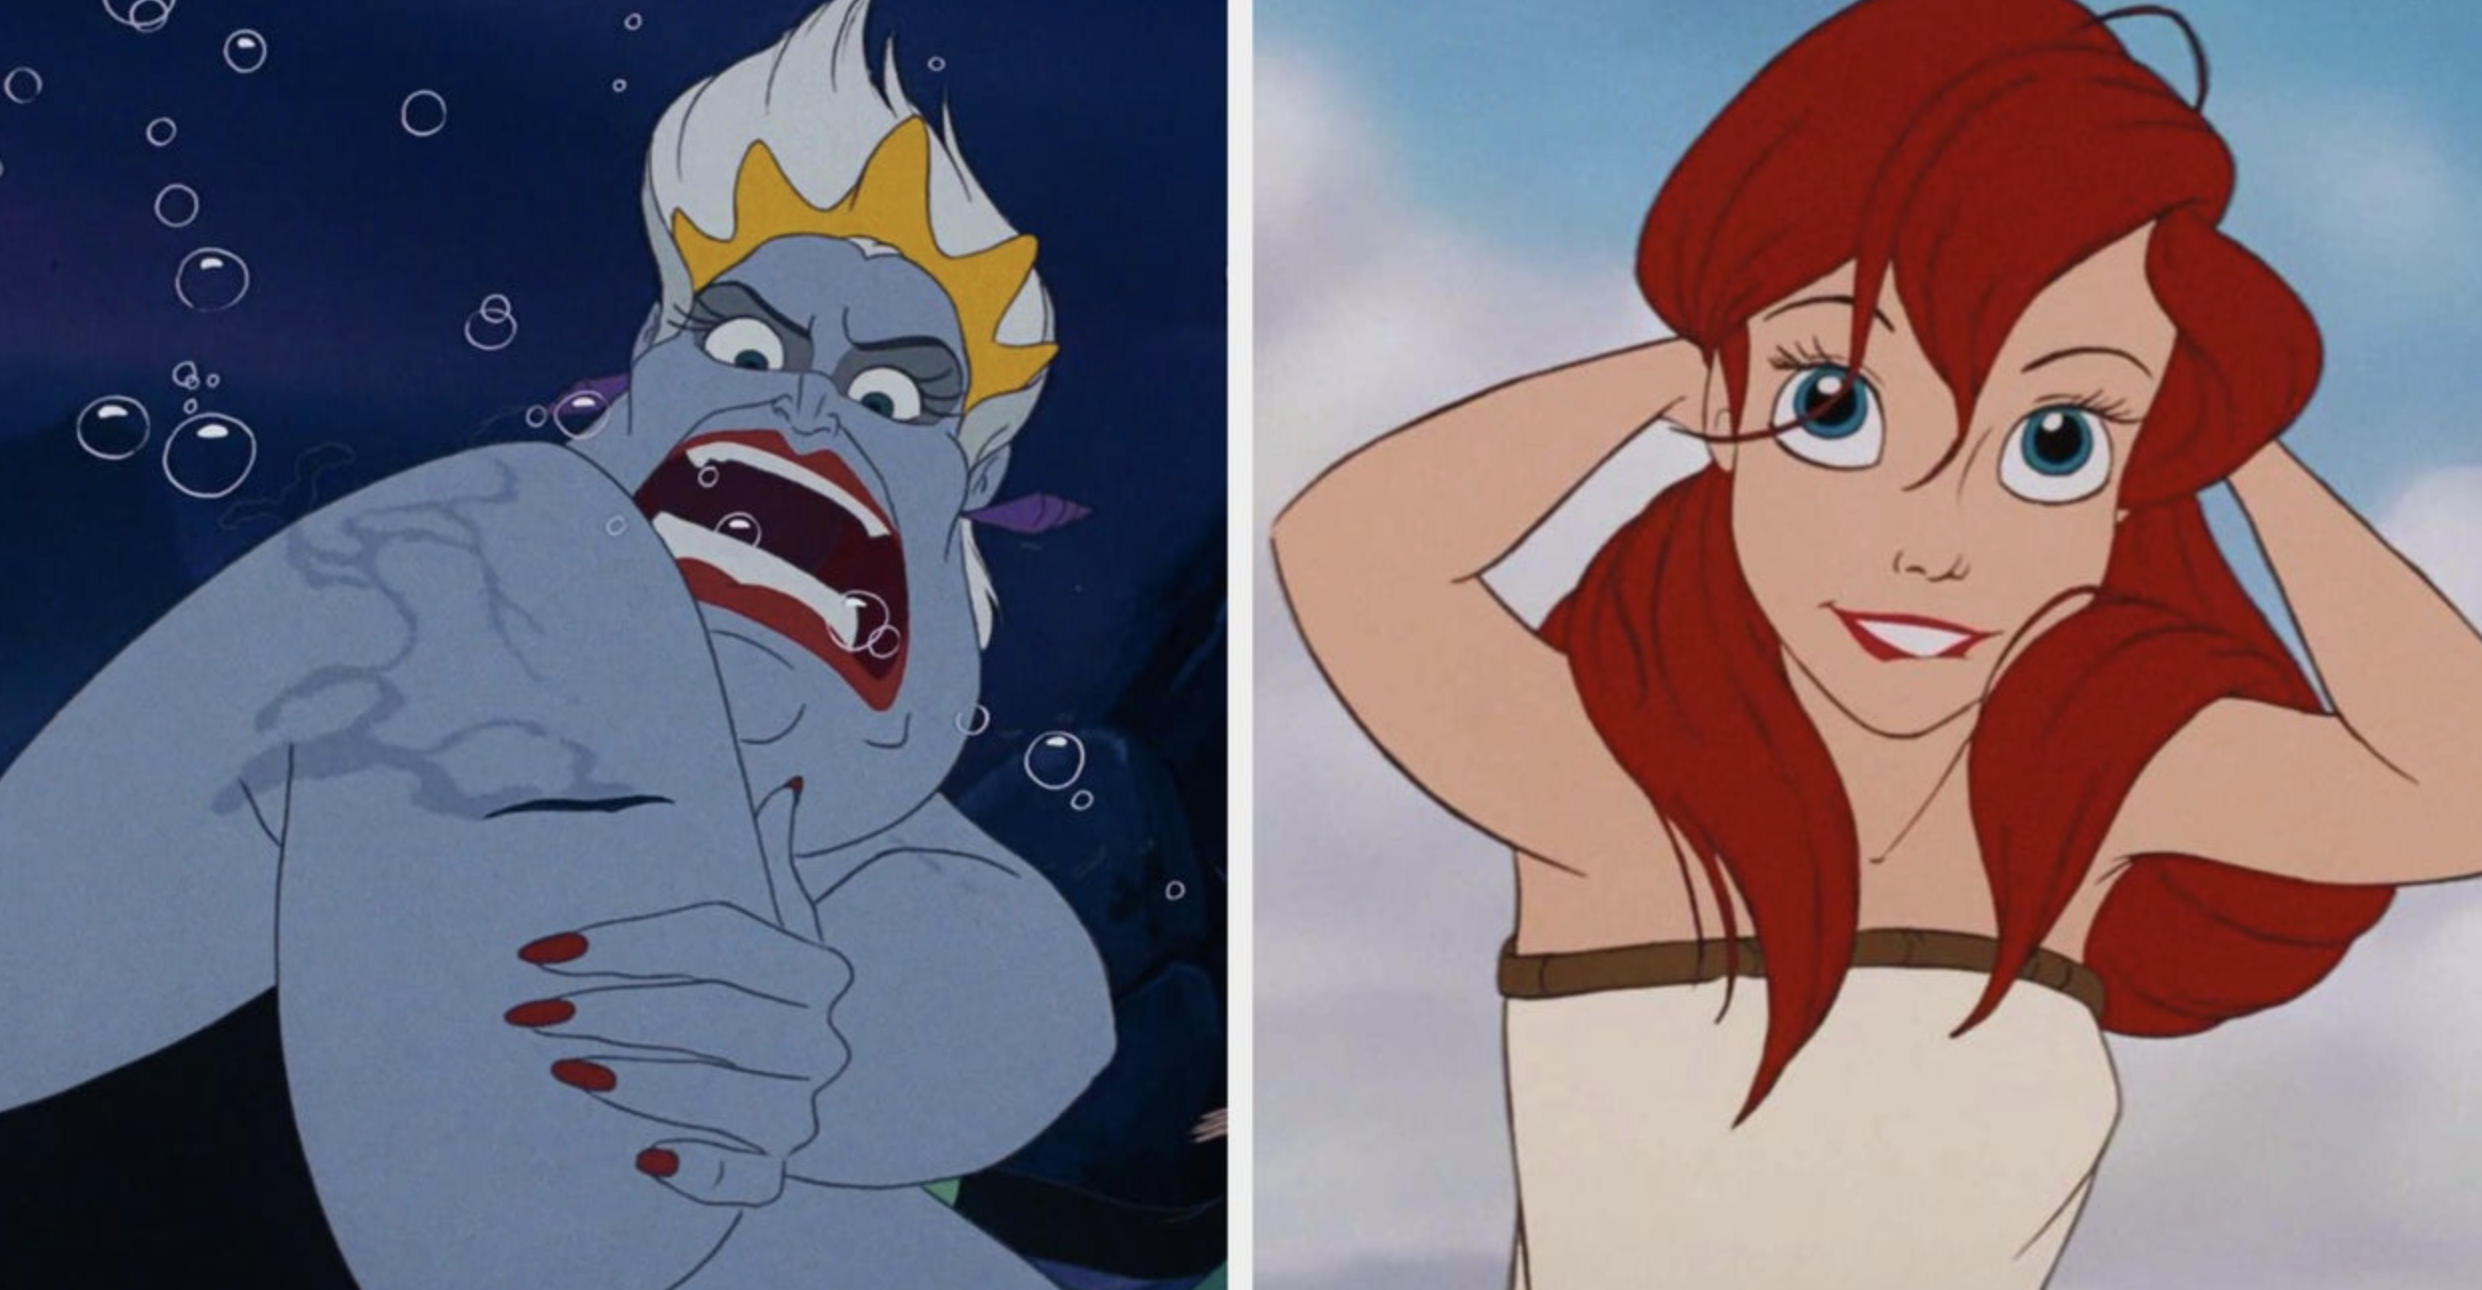 two images: on the left is animated ursula, on the right is animated ariel